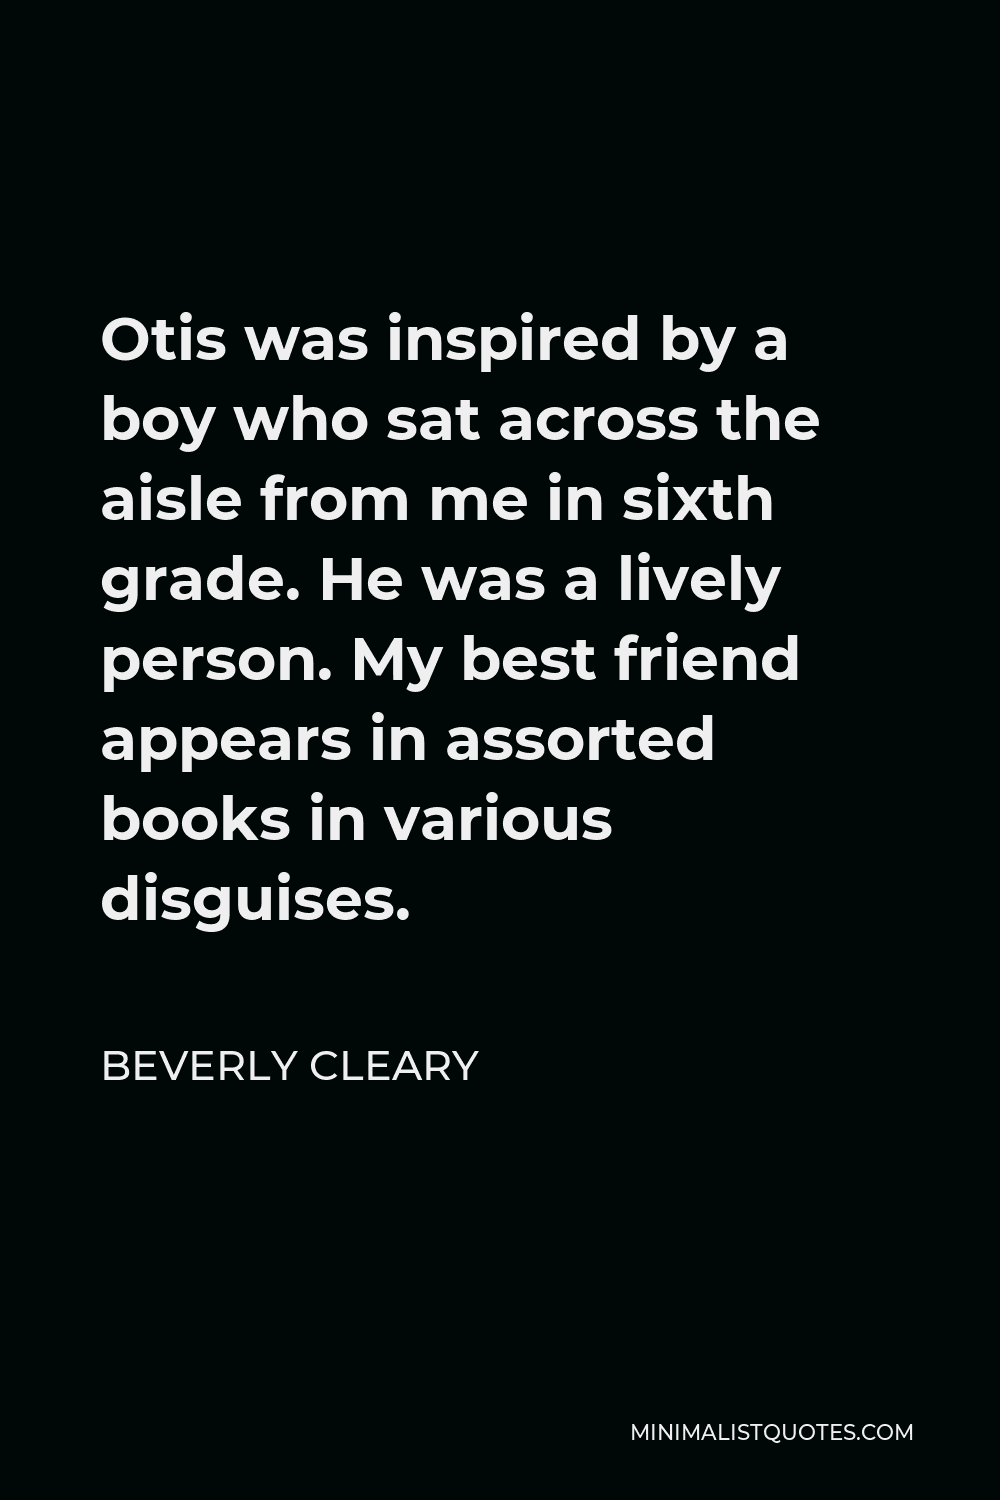 Beverly Cleary Quote - Otis was inspired by a boy who sat across the aisle from me in sixth grade. He was a lively person. My best friend appears in assorted books in various disguises.